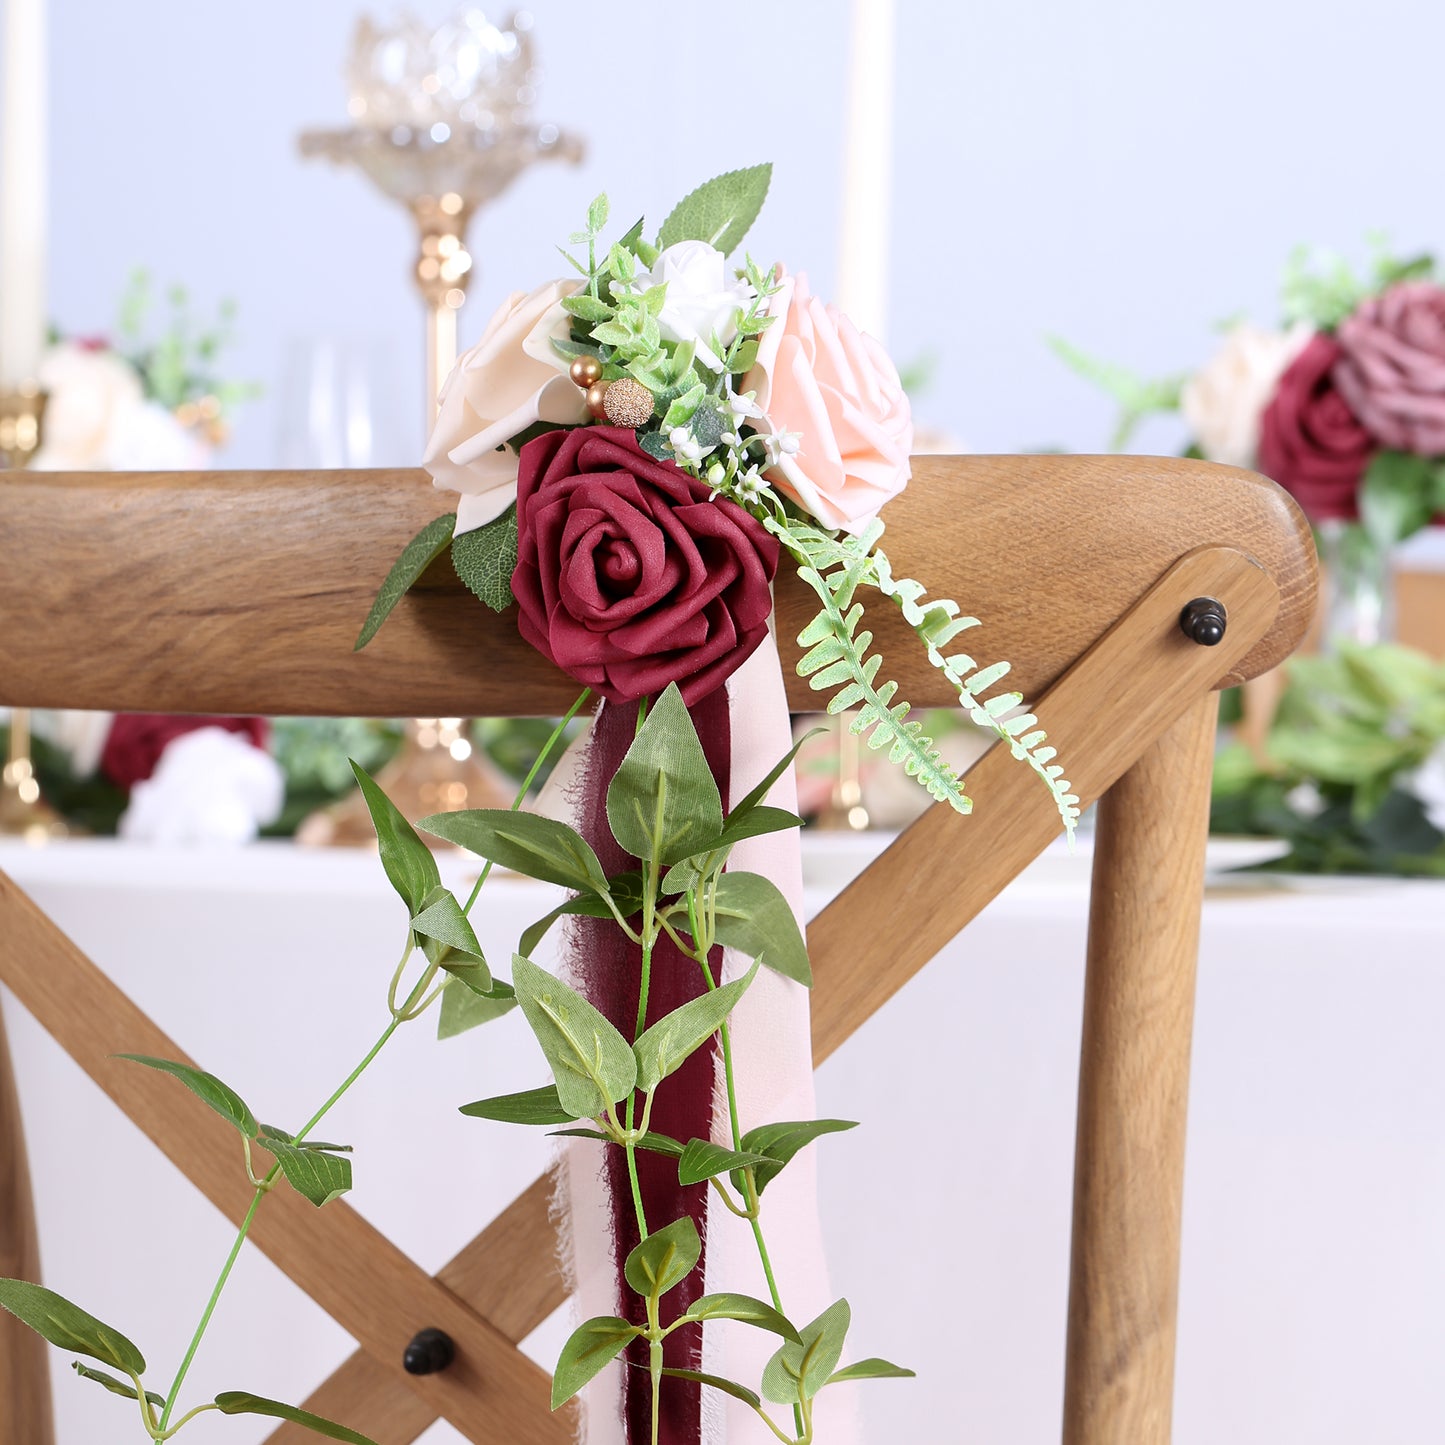 Wedding Aisle Decorations Burgundy Pew Flowers Set of 10 for Wedding Ceremony Party Chair Decor with Artificial Flowers Eucalyptus and Ribbons